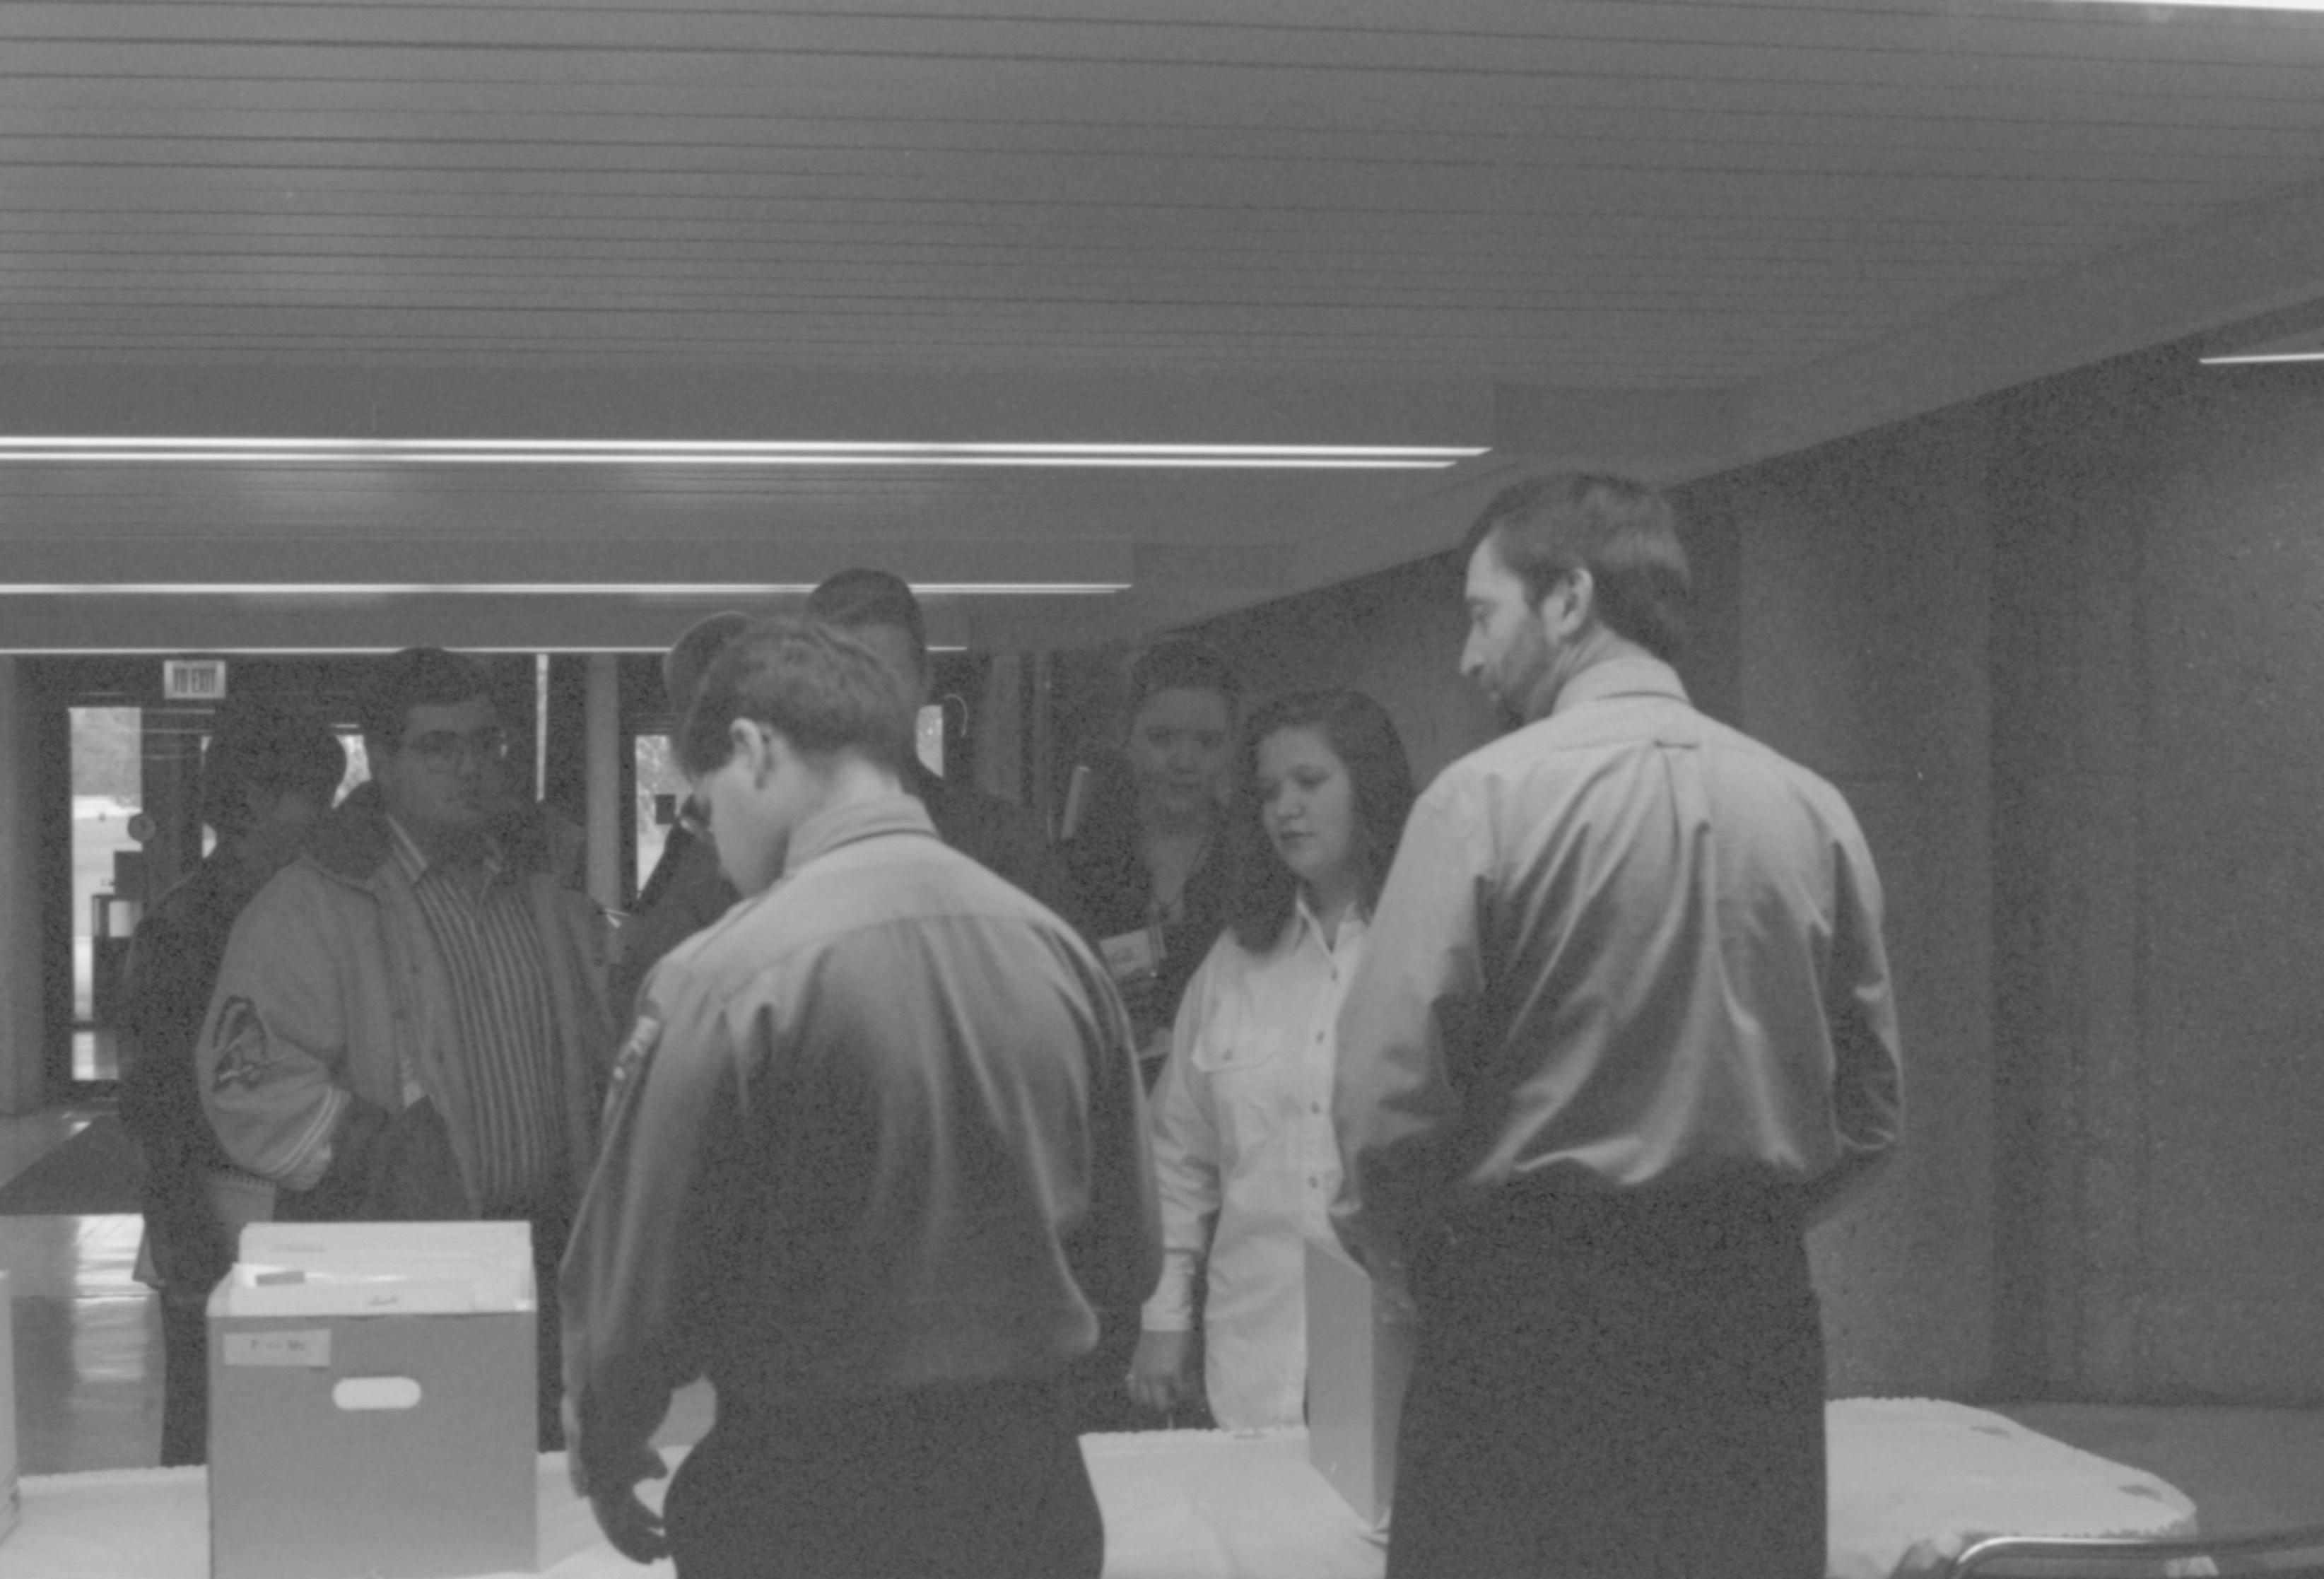 Arrival of HS students - check-in table. 1-1997 Colloq (b/w) Colloquium, 1997